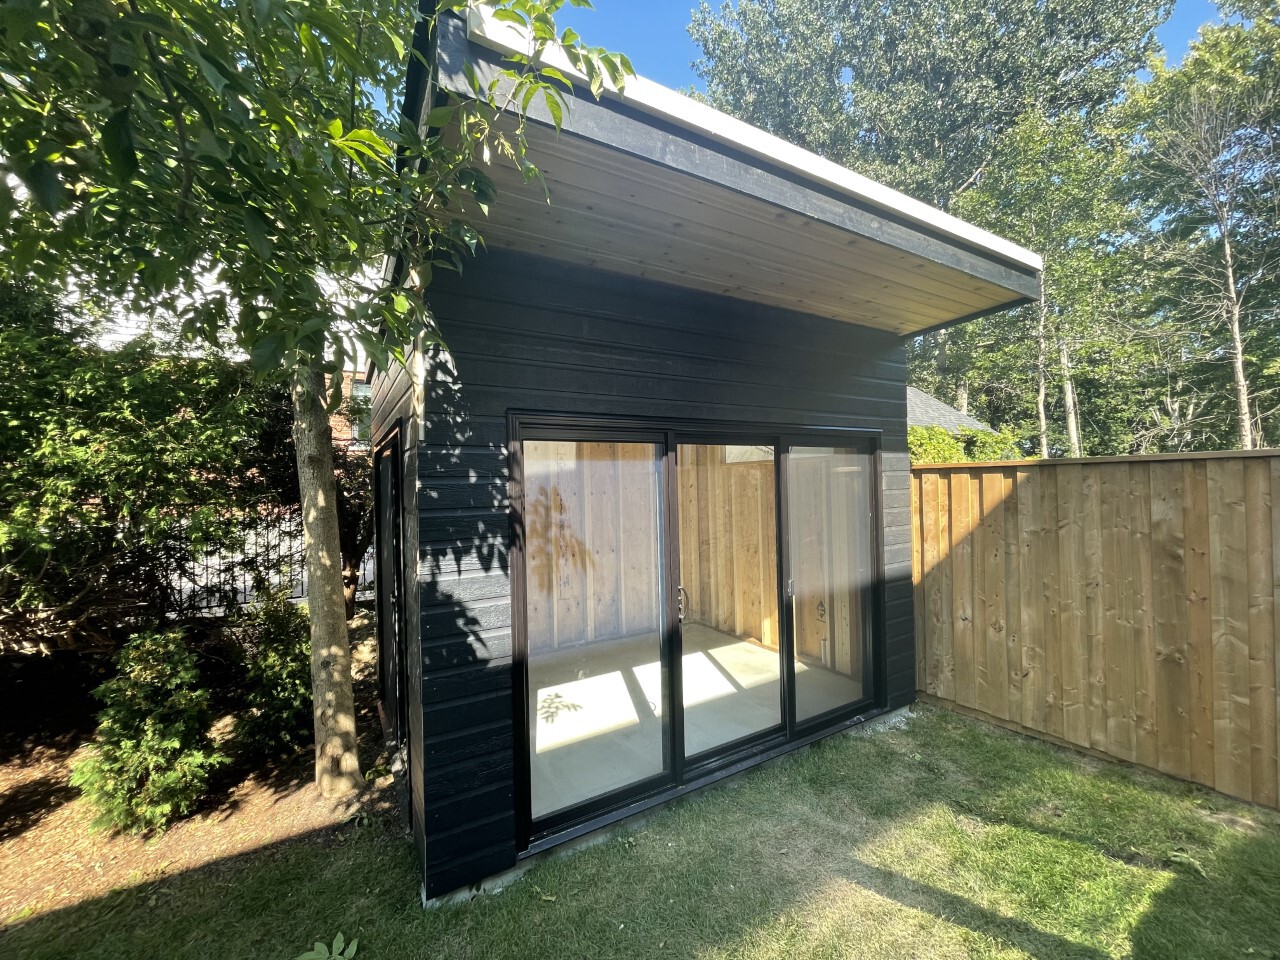 Front view of 9' x 12' Verana Home Studio located in Mississauga Ontario – Summerwood Products